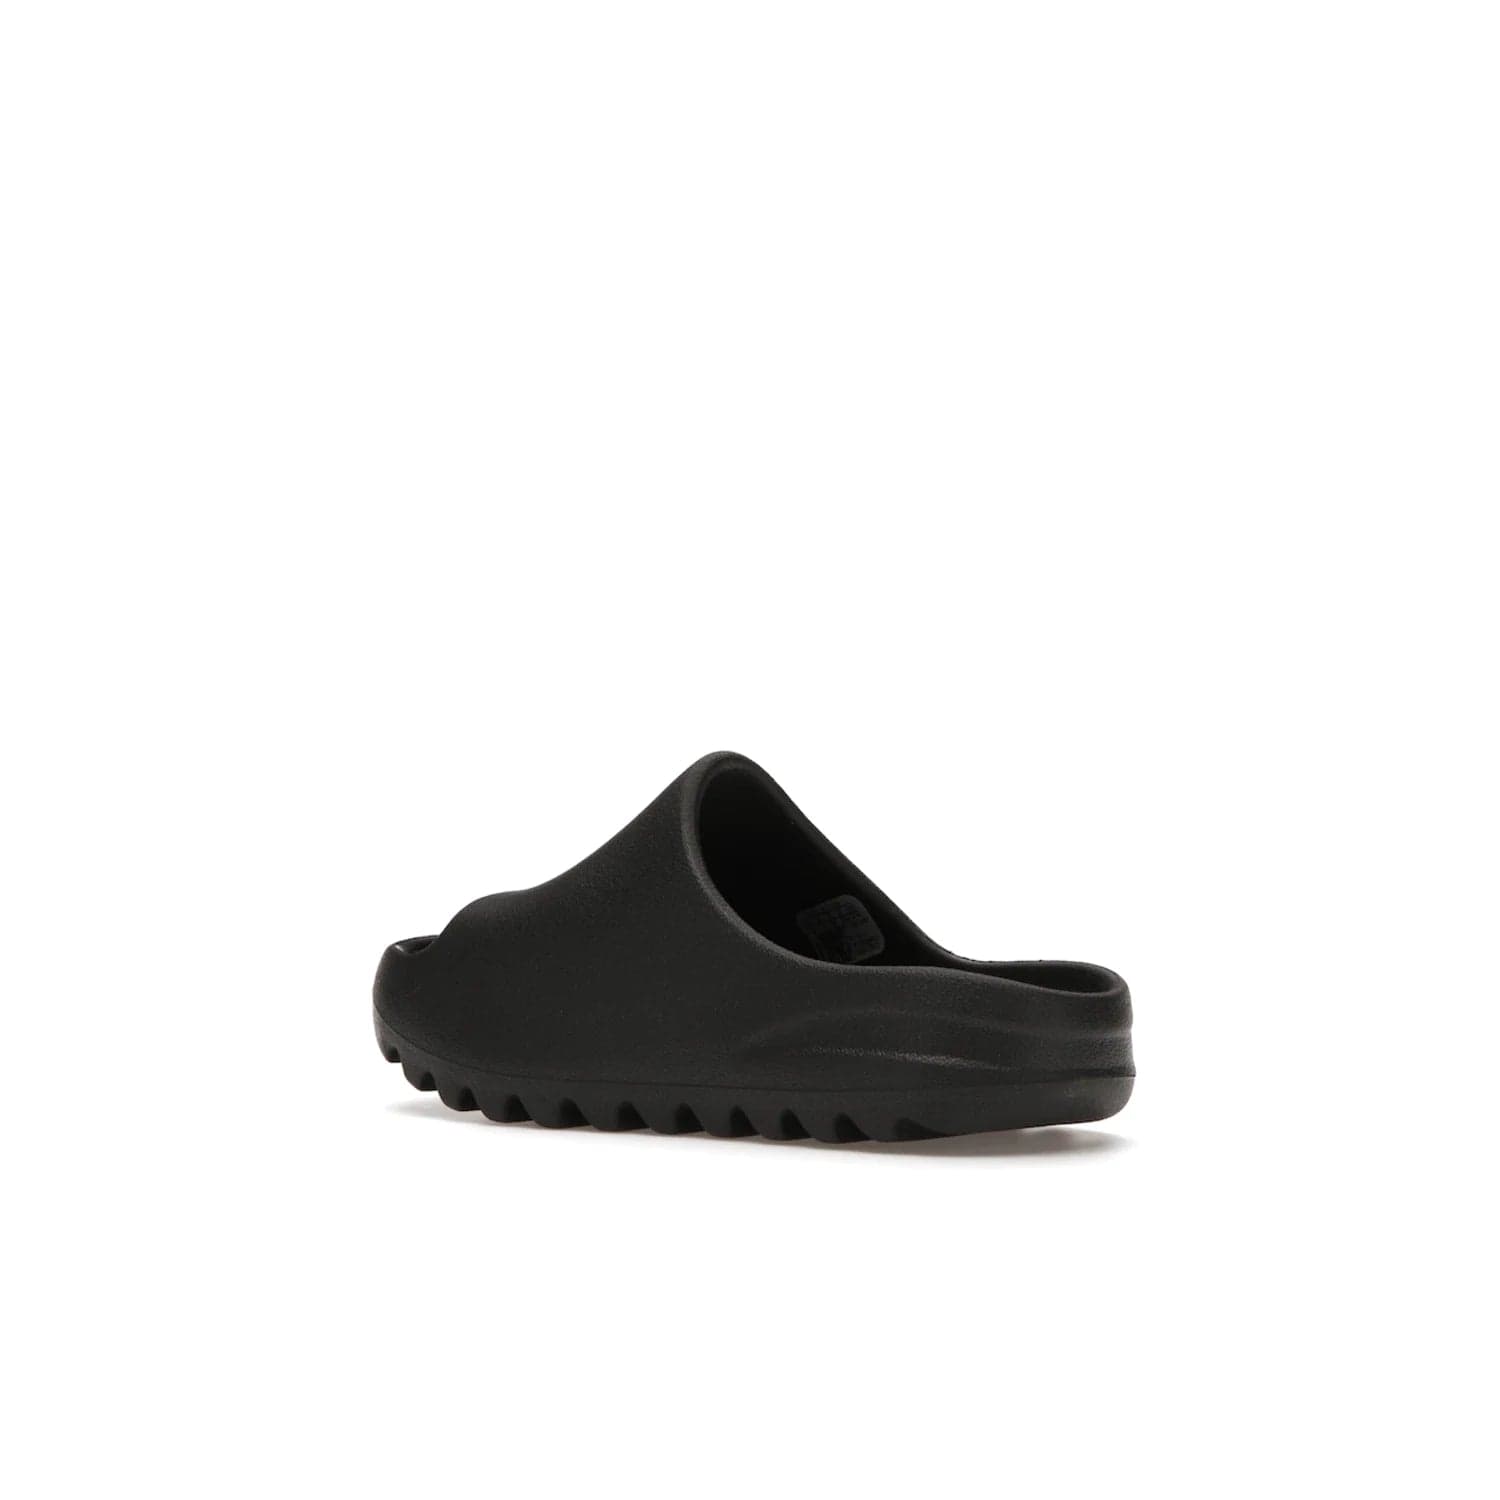 adidas Yeezy Slide Onyx (Kids) - Image 23 - Only at www.BallersClubKickz.com - adidas Yeezy Slide Onyx (Kids): Comfortable foam construction with textured surface and iconic three-stripe logo. Breathable, open-toe design and deep grooves for traction. Released in March 2021 at $50.